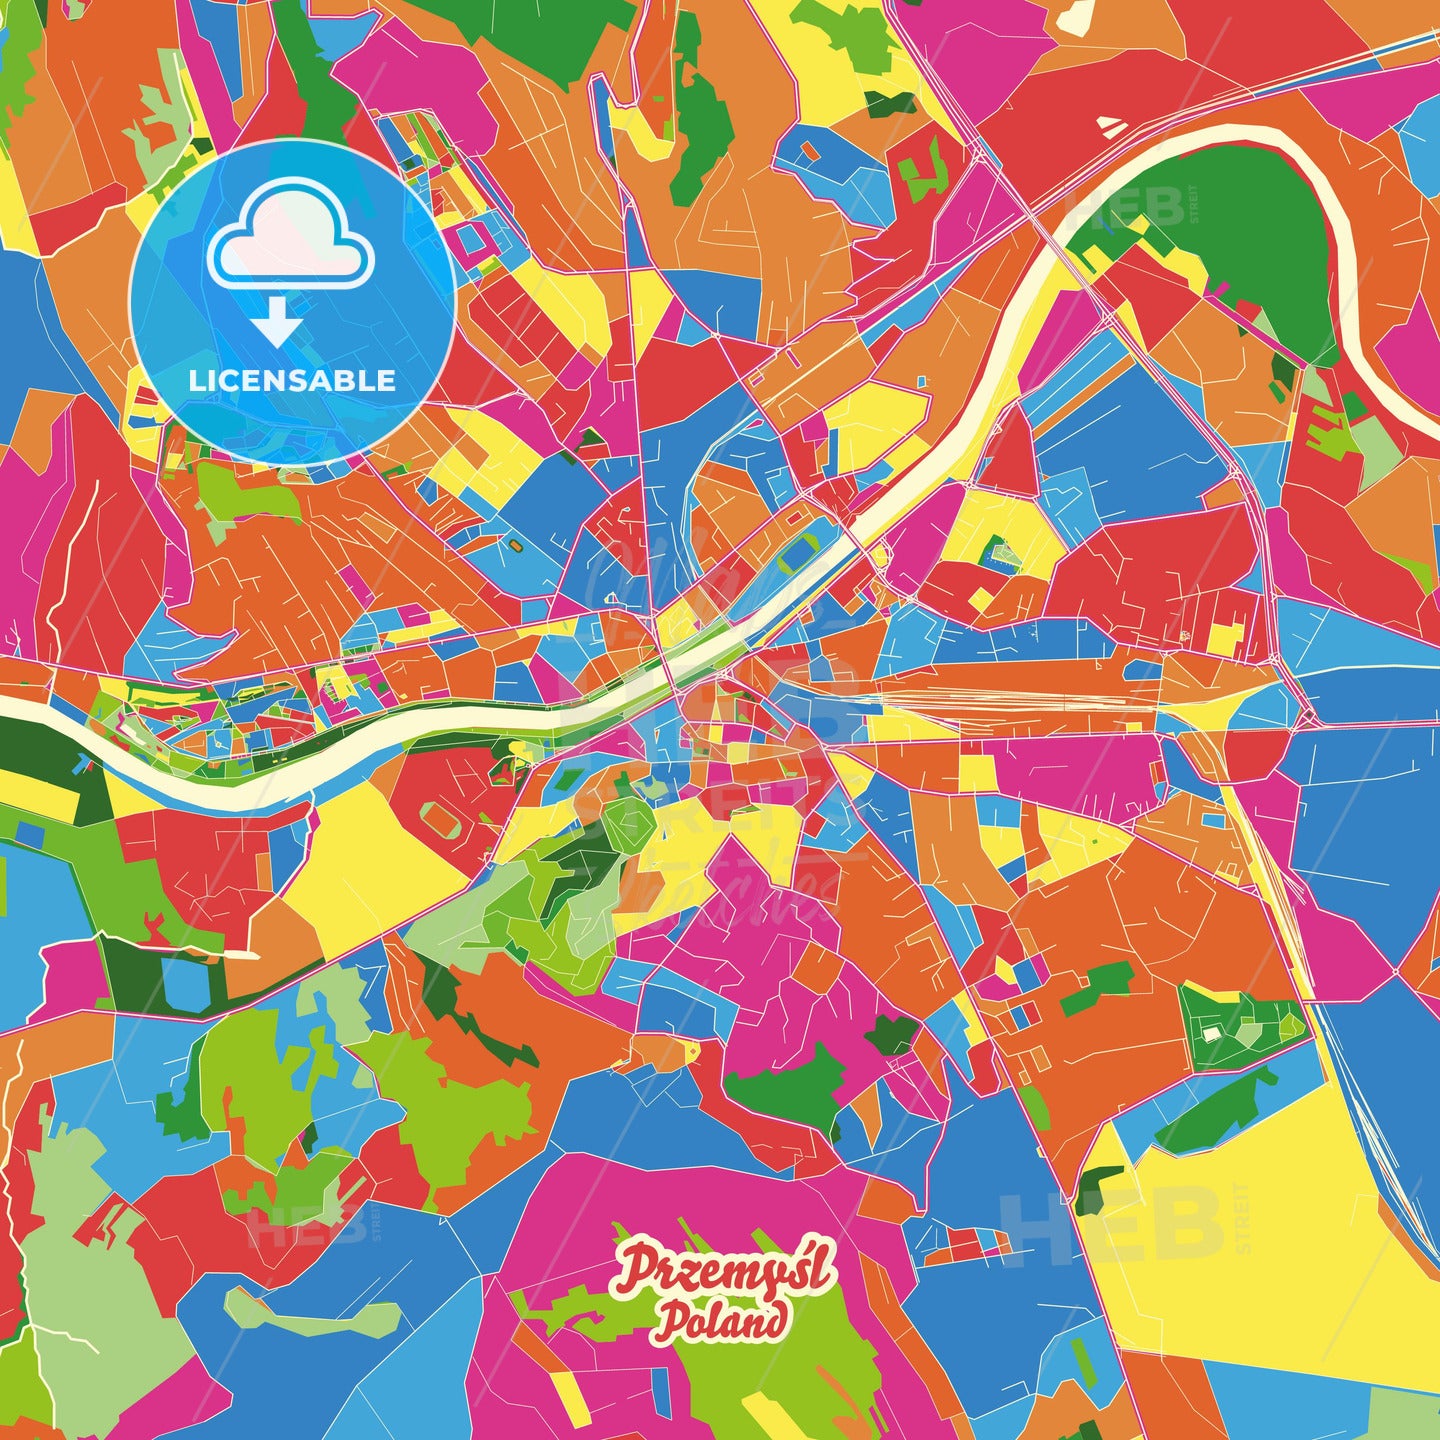 Przemyśl, Poland Crazy Colorful Street Map Poster Template - HEBSTREITS Sketches